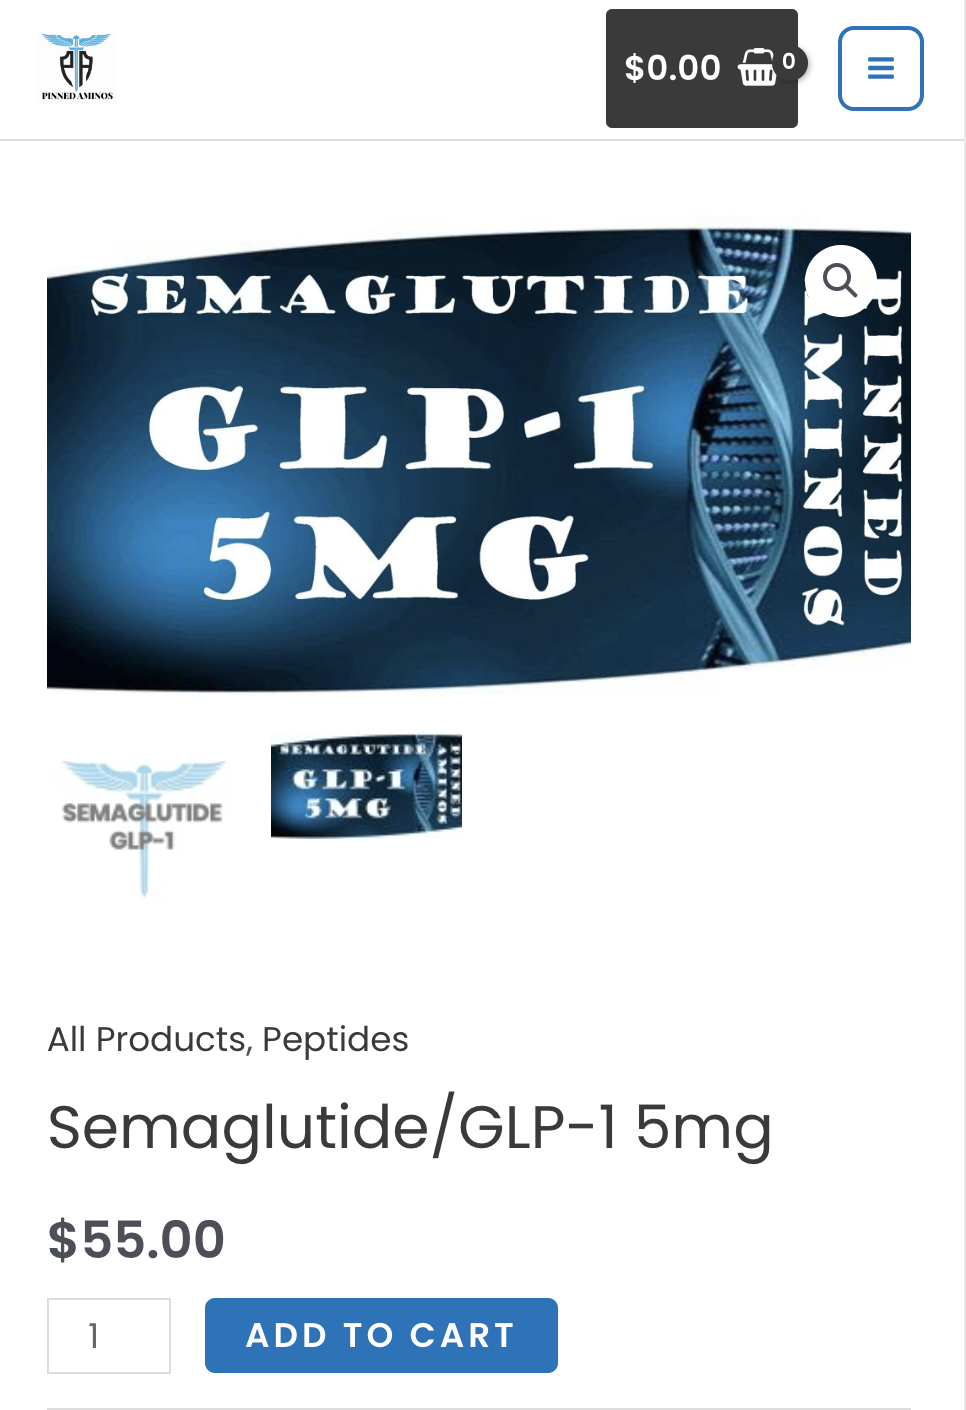 A screenshot of an ecommerce page selling semaglutide